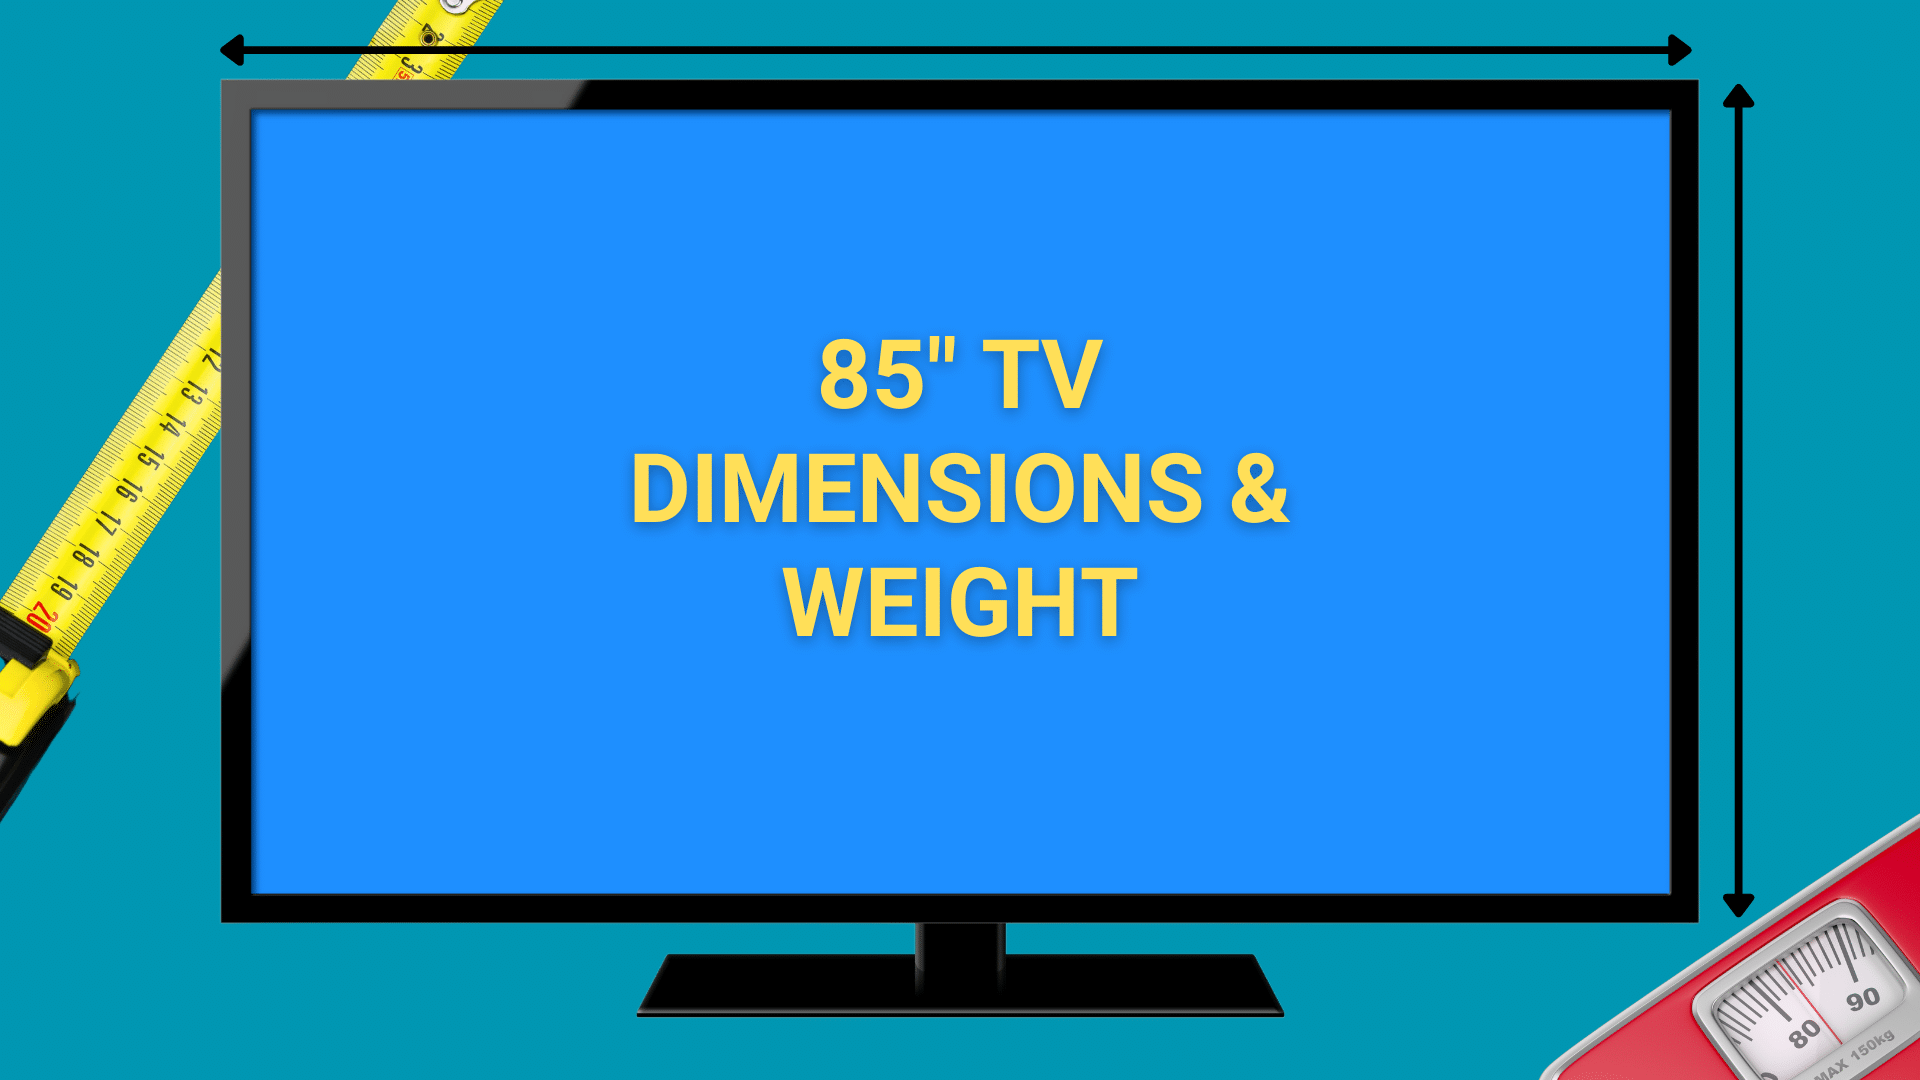 Image of 85 inch TV with measuring tape and bath scale in background.